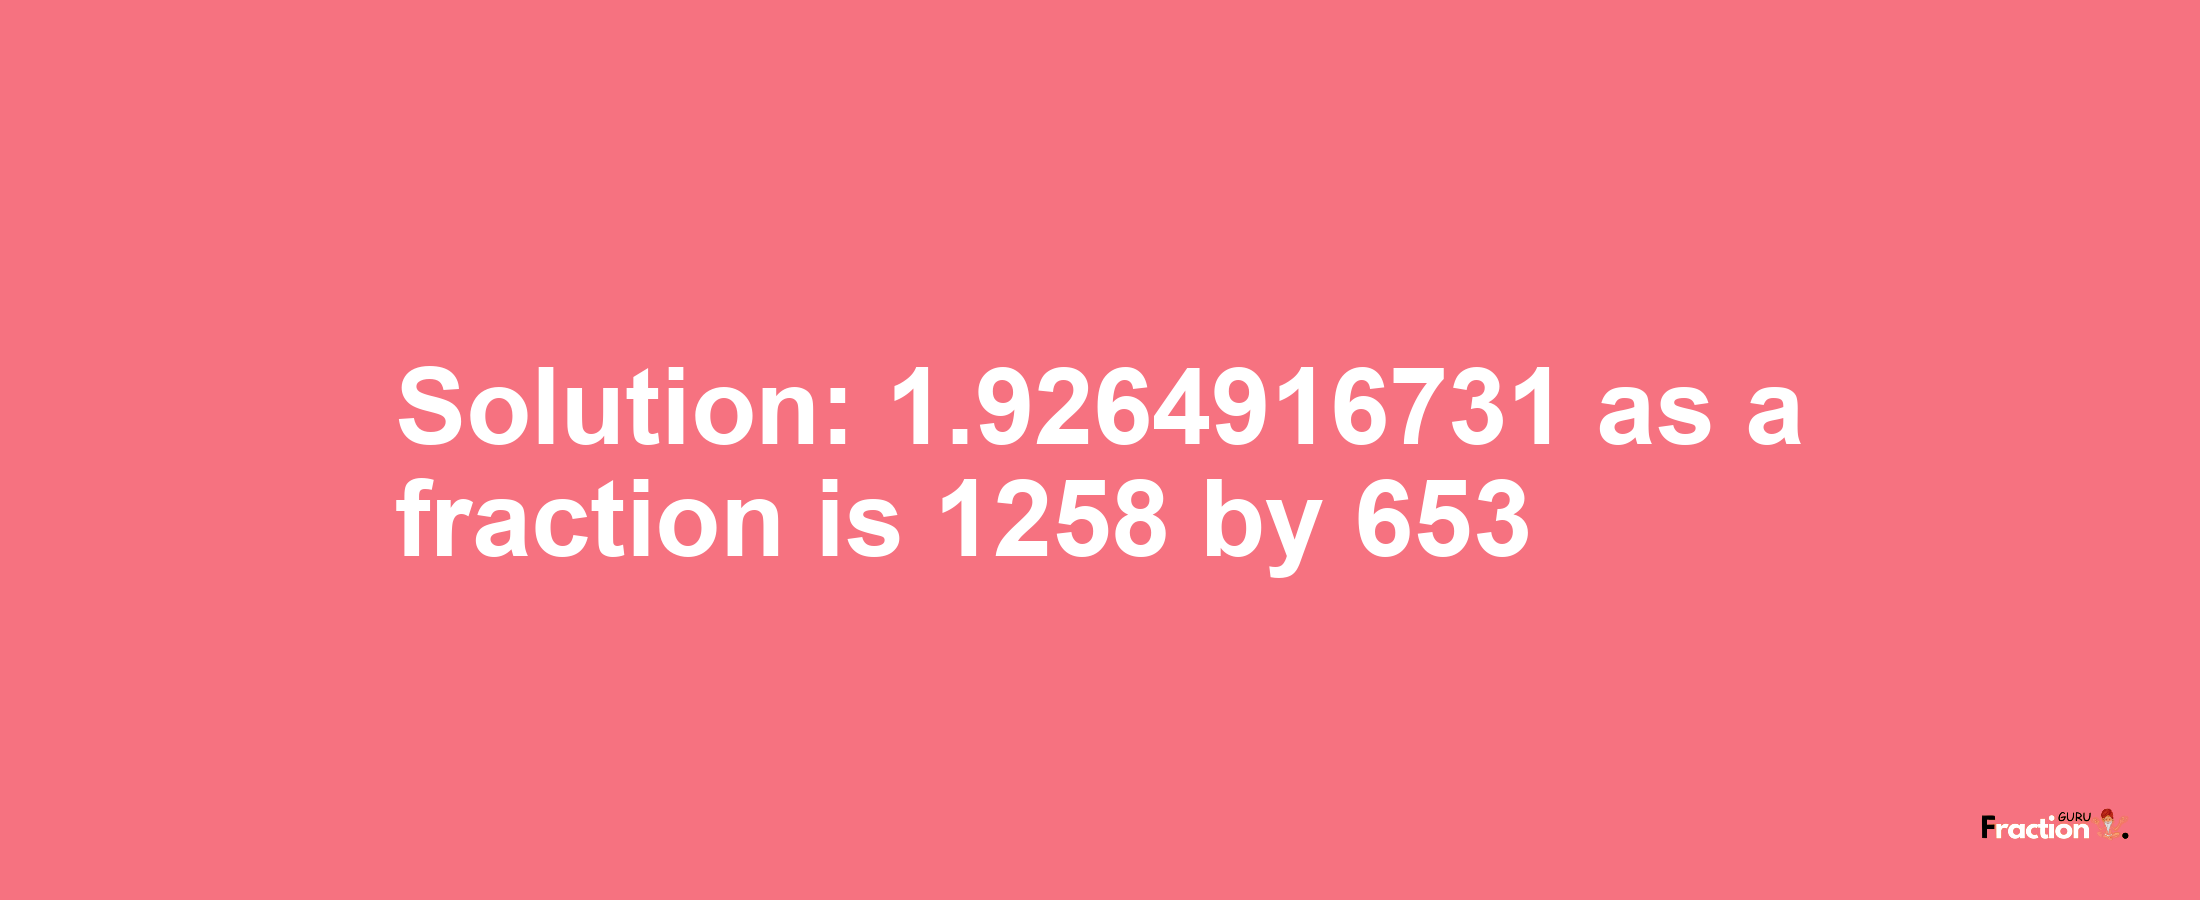 Solution:1.9264916731 as a fraction is 1258/653